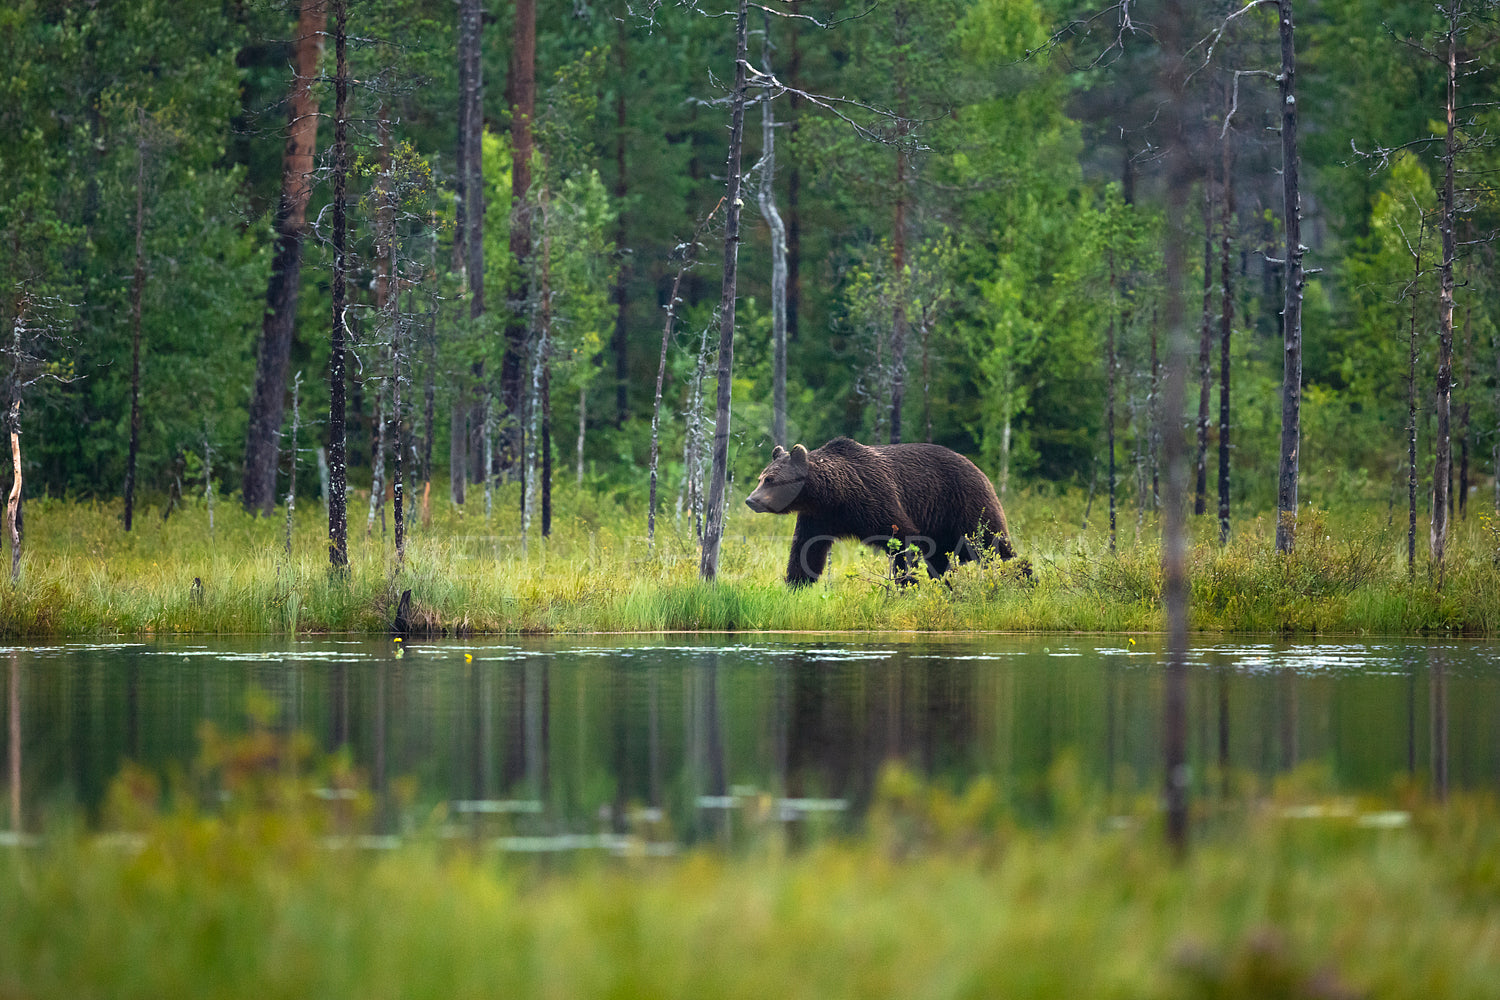 Large adult brown bear walking in the forest